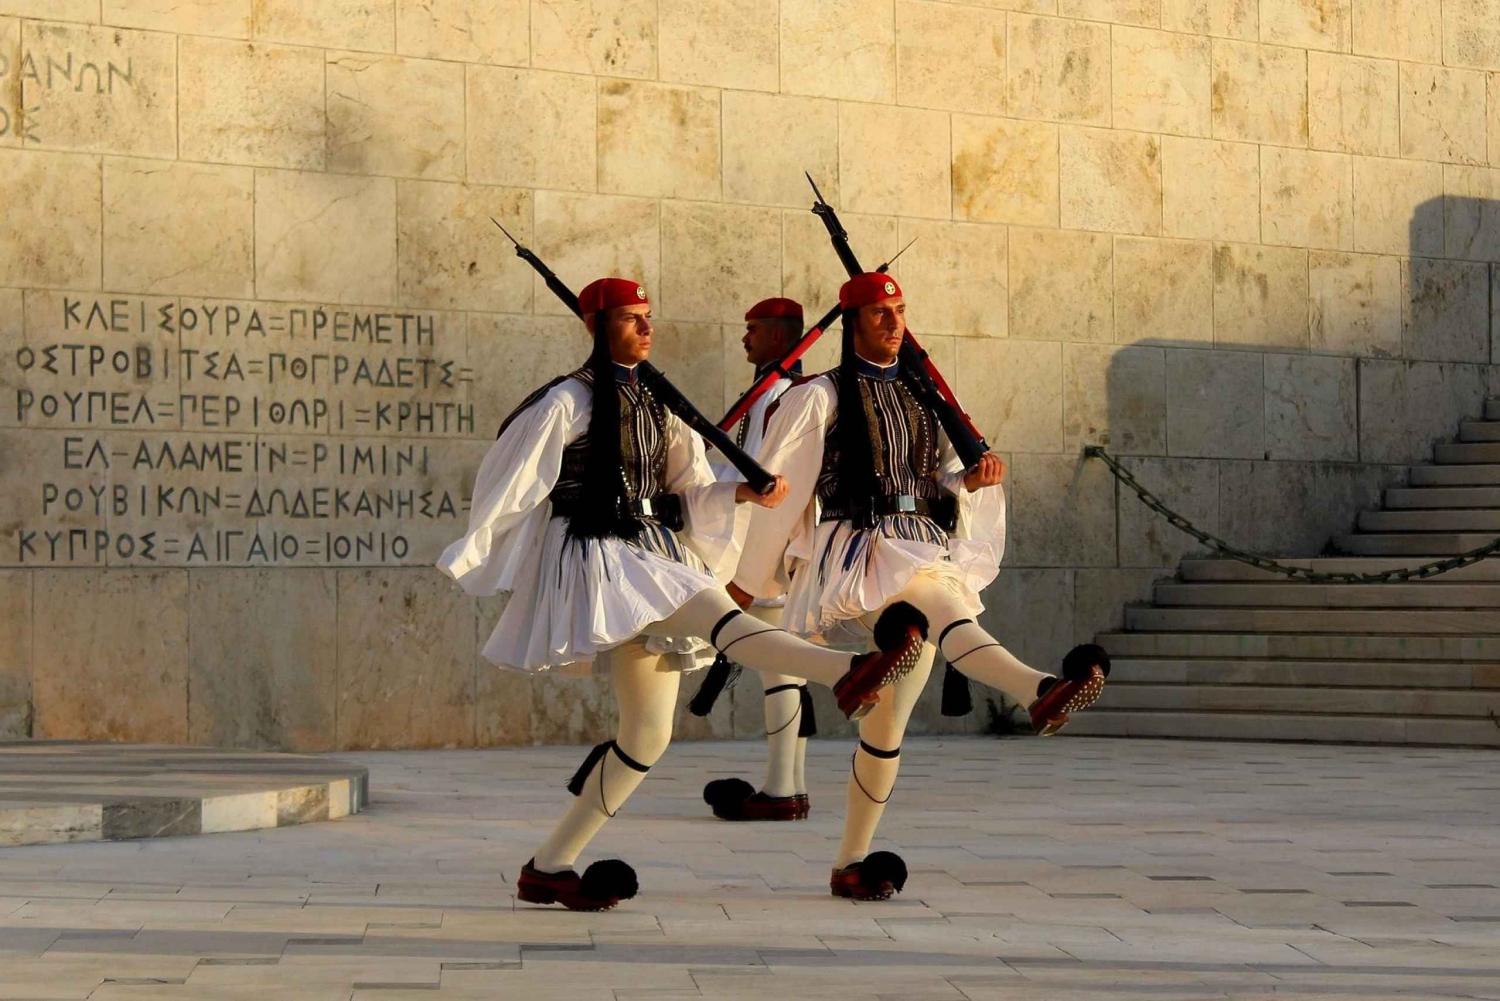 4-Hour Athens City Highlights Tour with Acropolis